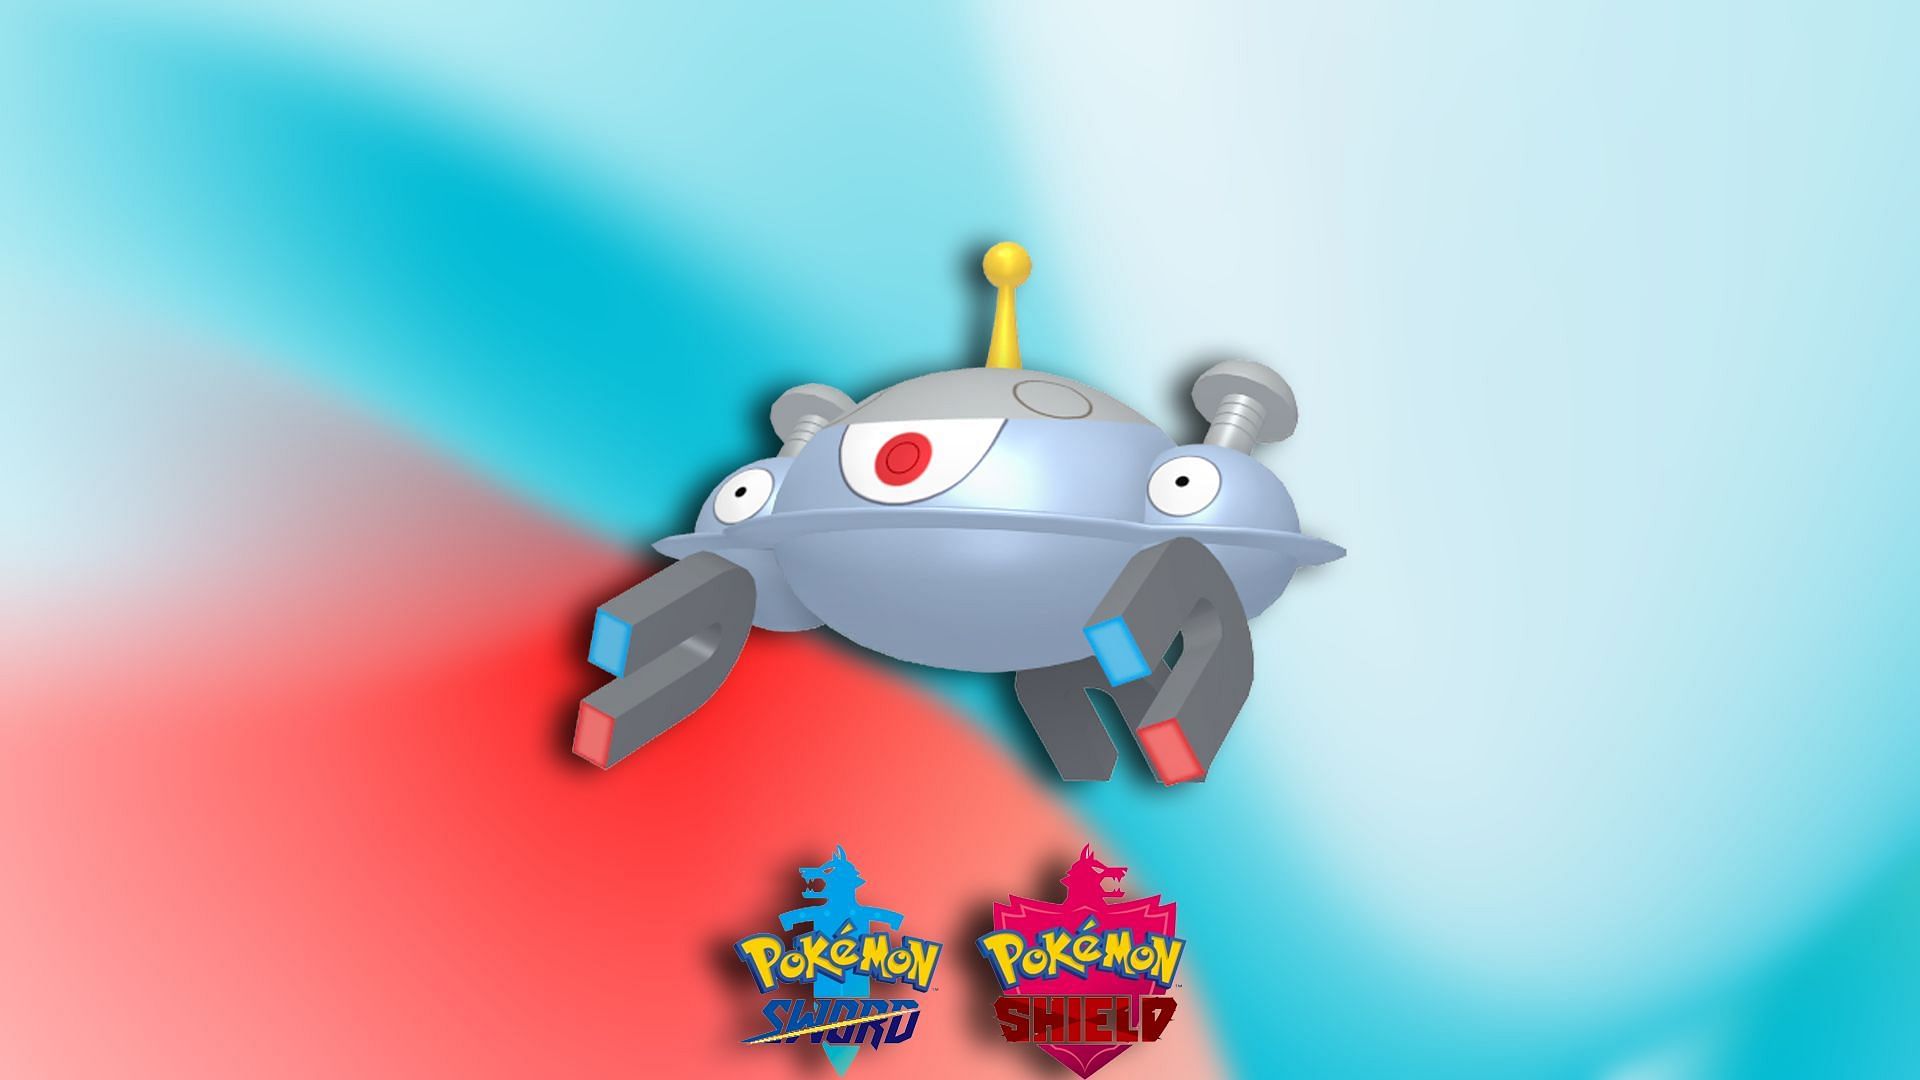 Magnezone is the second Pokemon in the best team for Pokemon Sword and Shield (Image via TPC)